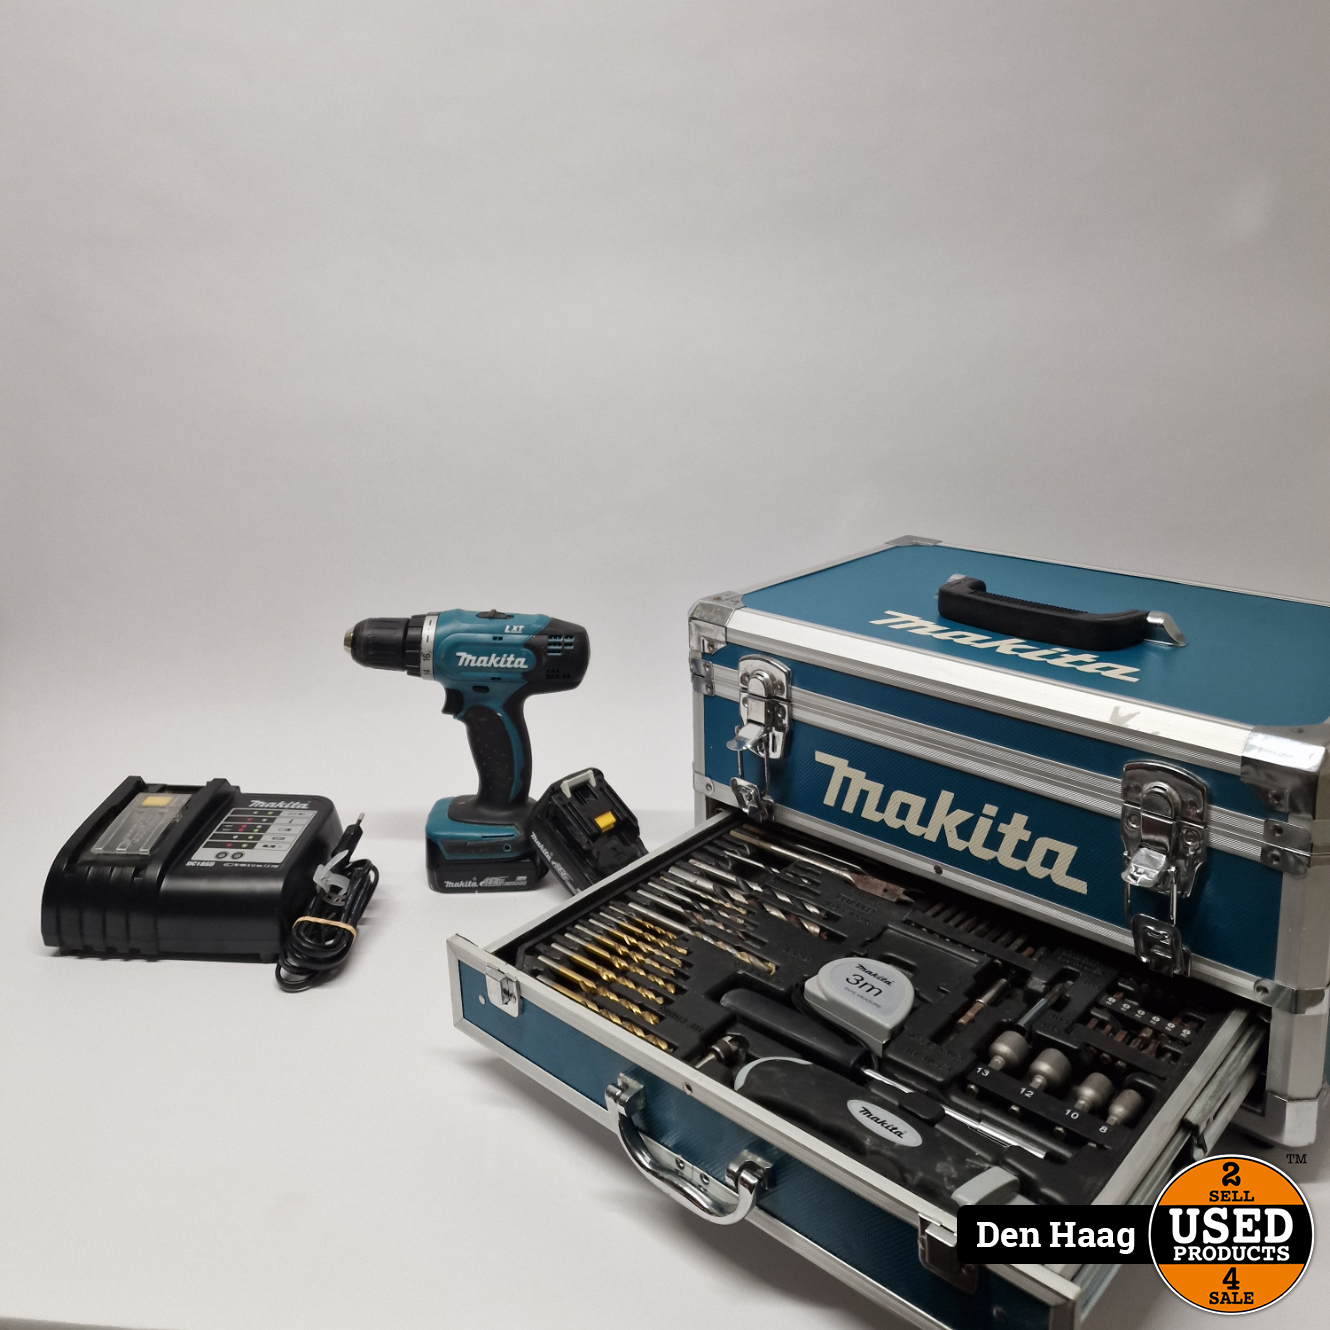 Makita DDF343SYX3 14,4V Set | nette staat Used Products Den